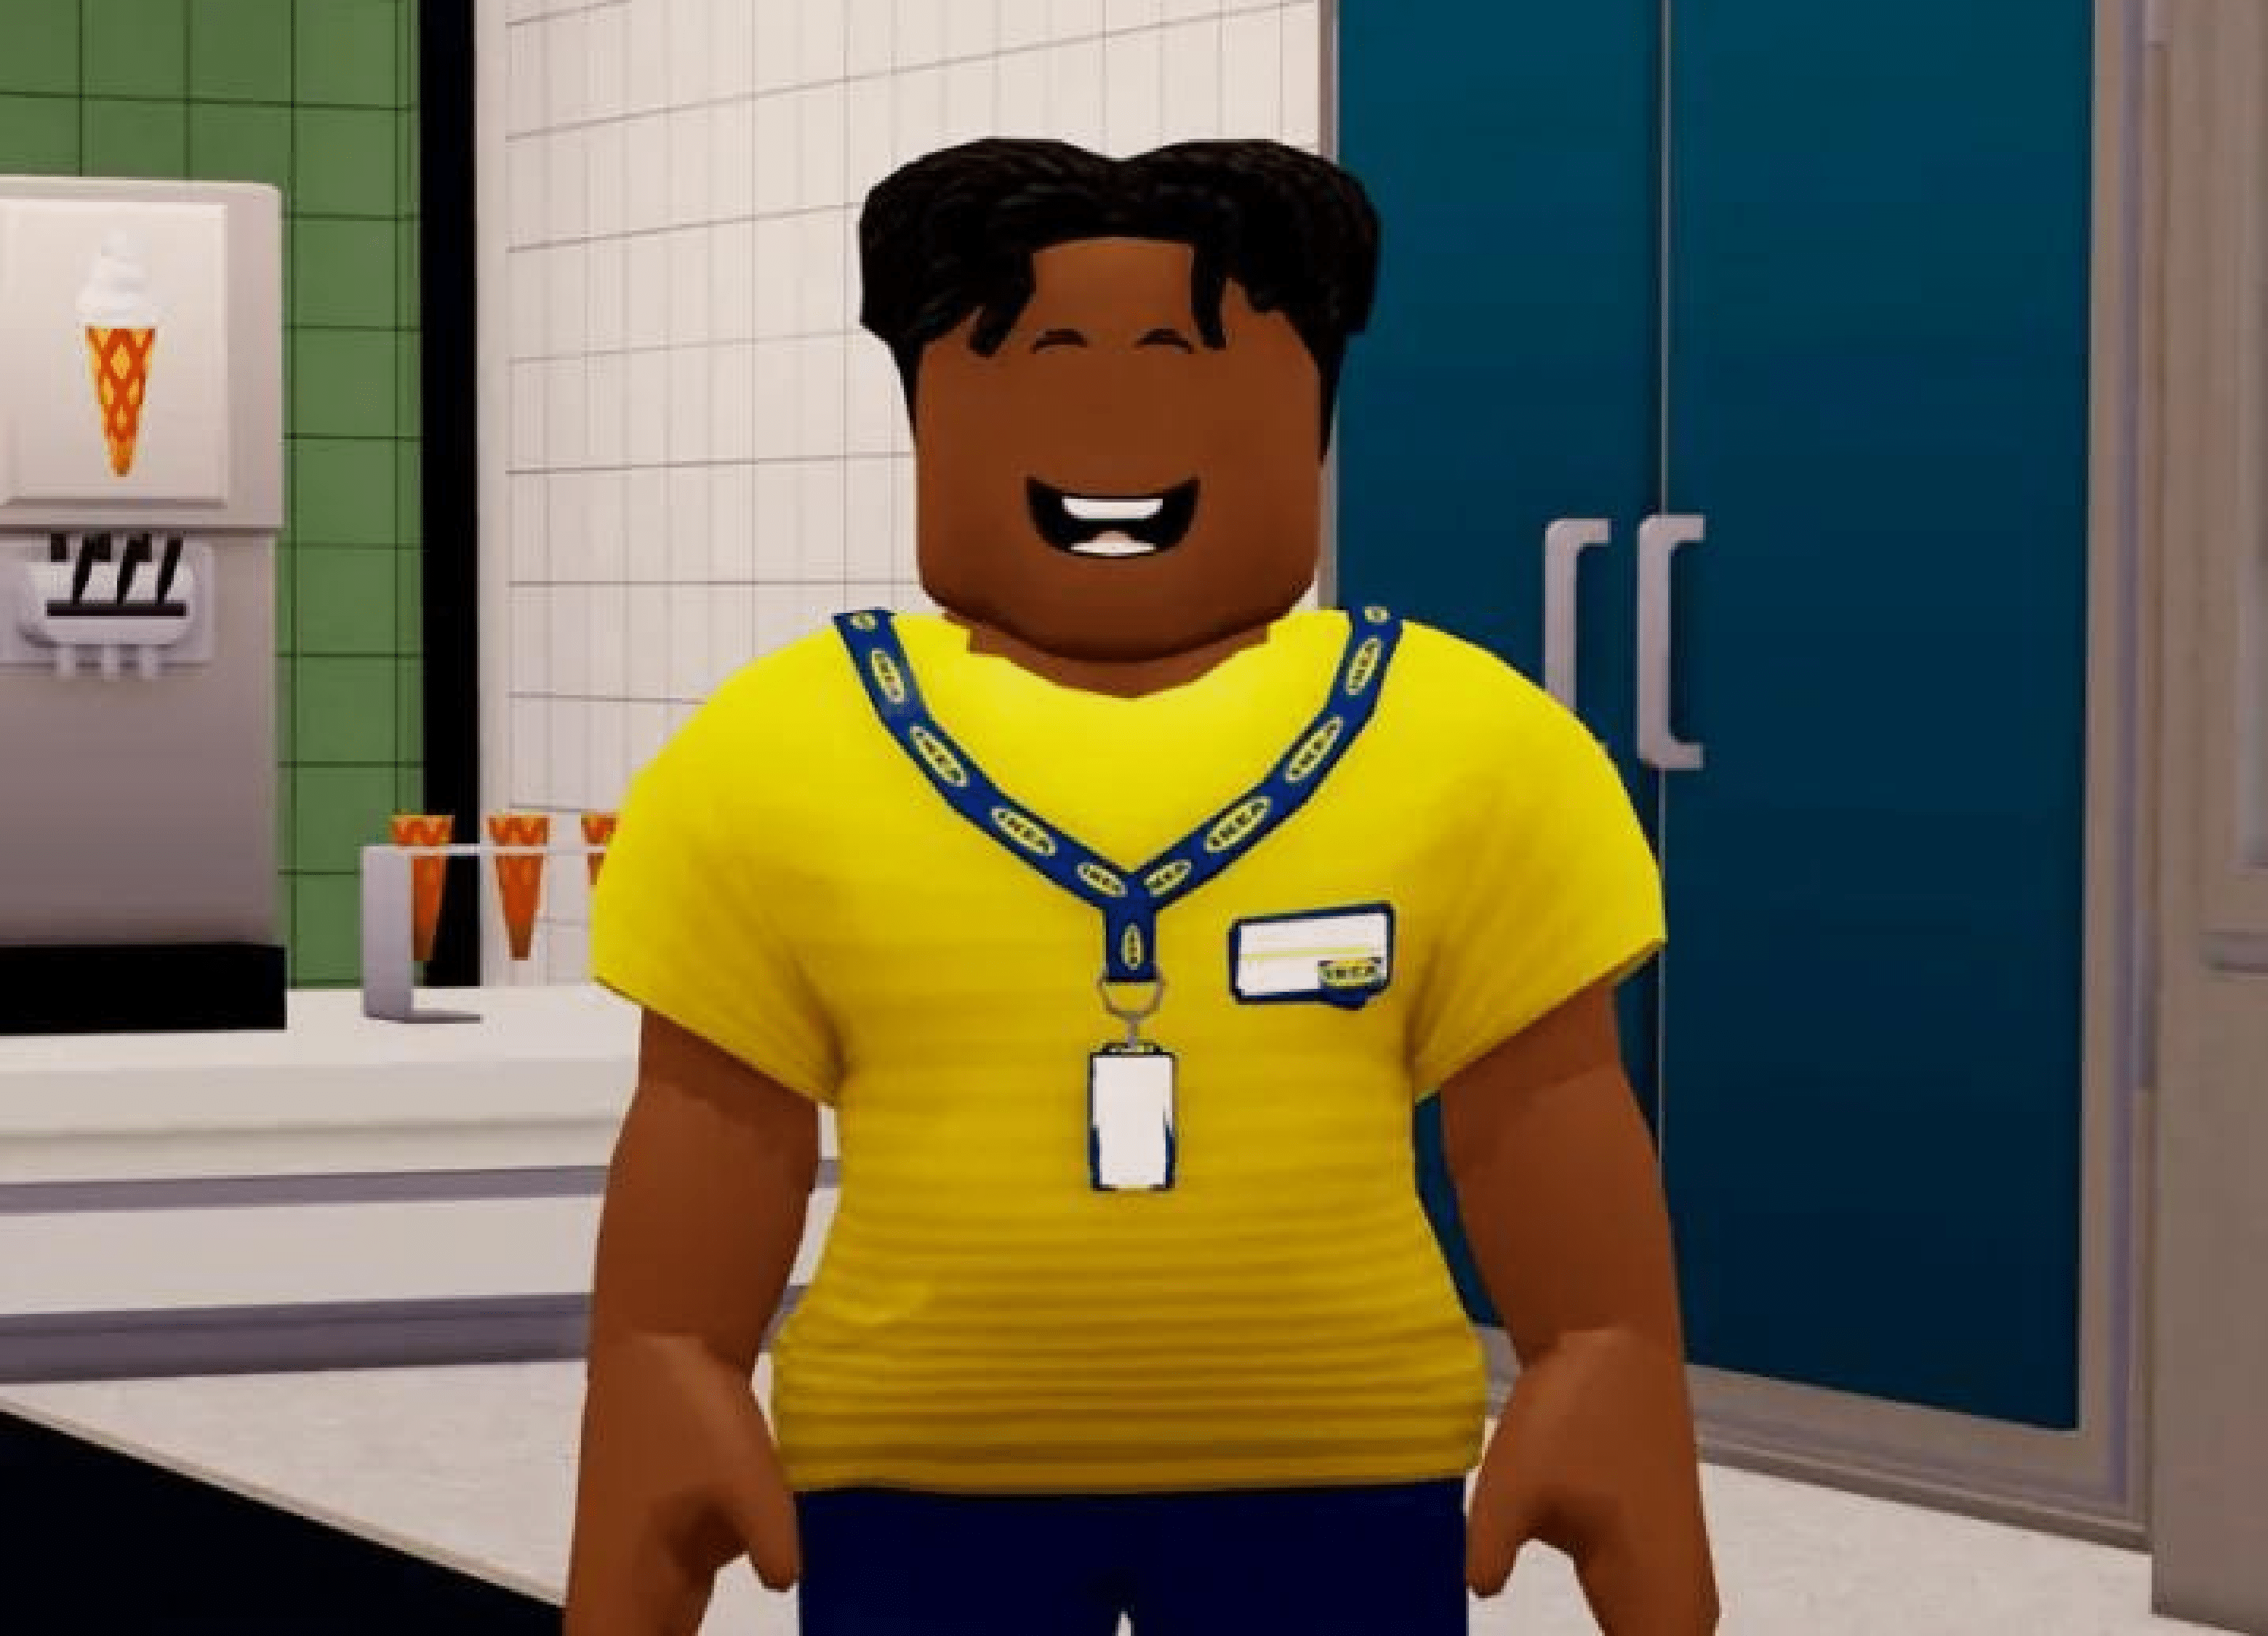 Ikea Offers £13.15 Per Hour Job to Run Virtual Store on Roblox